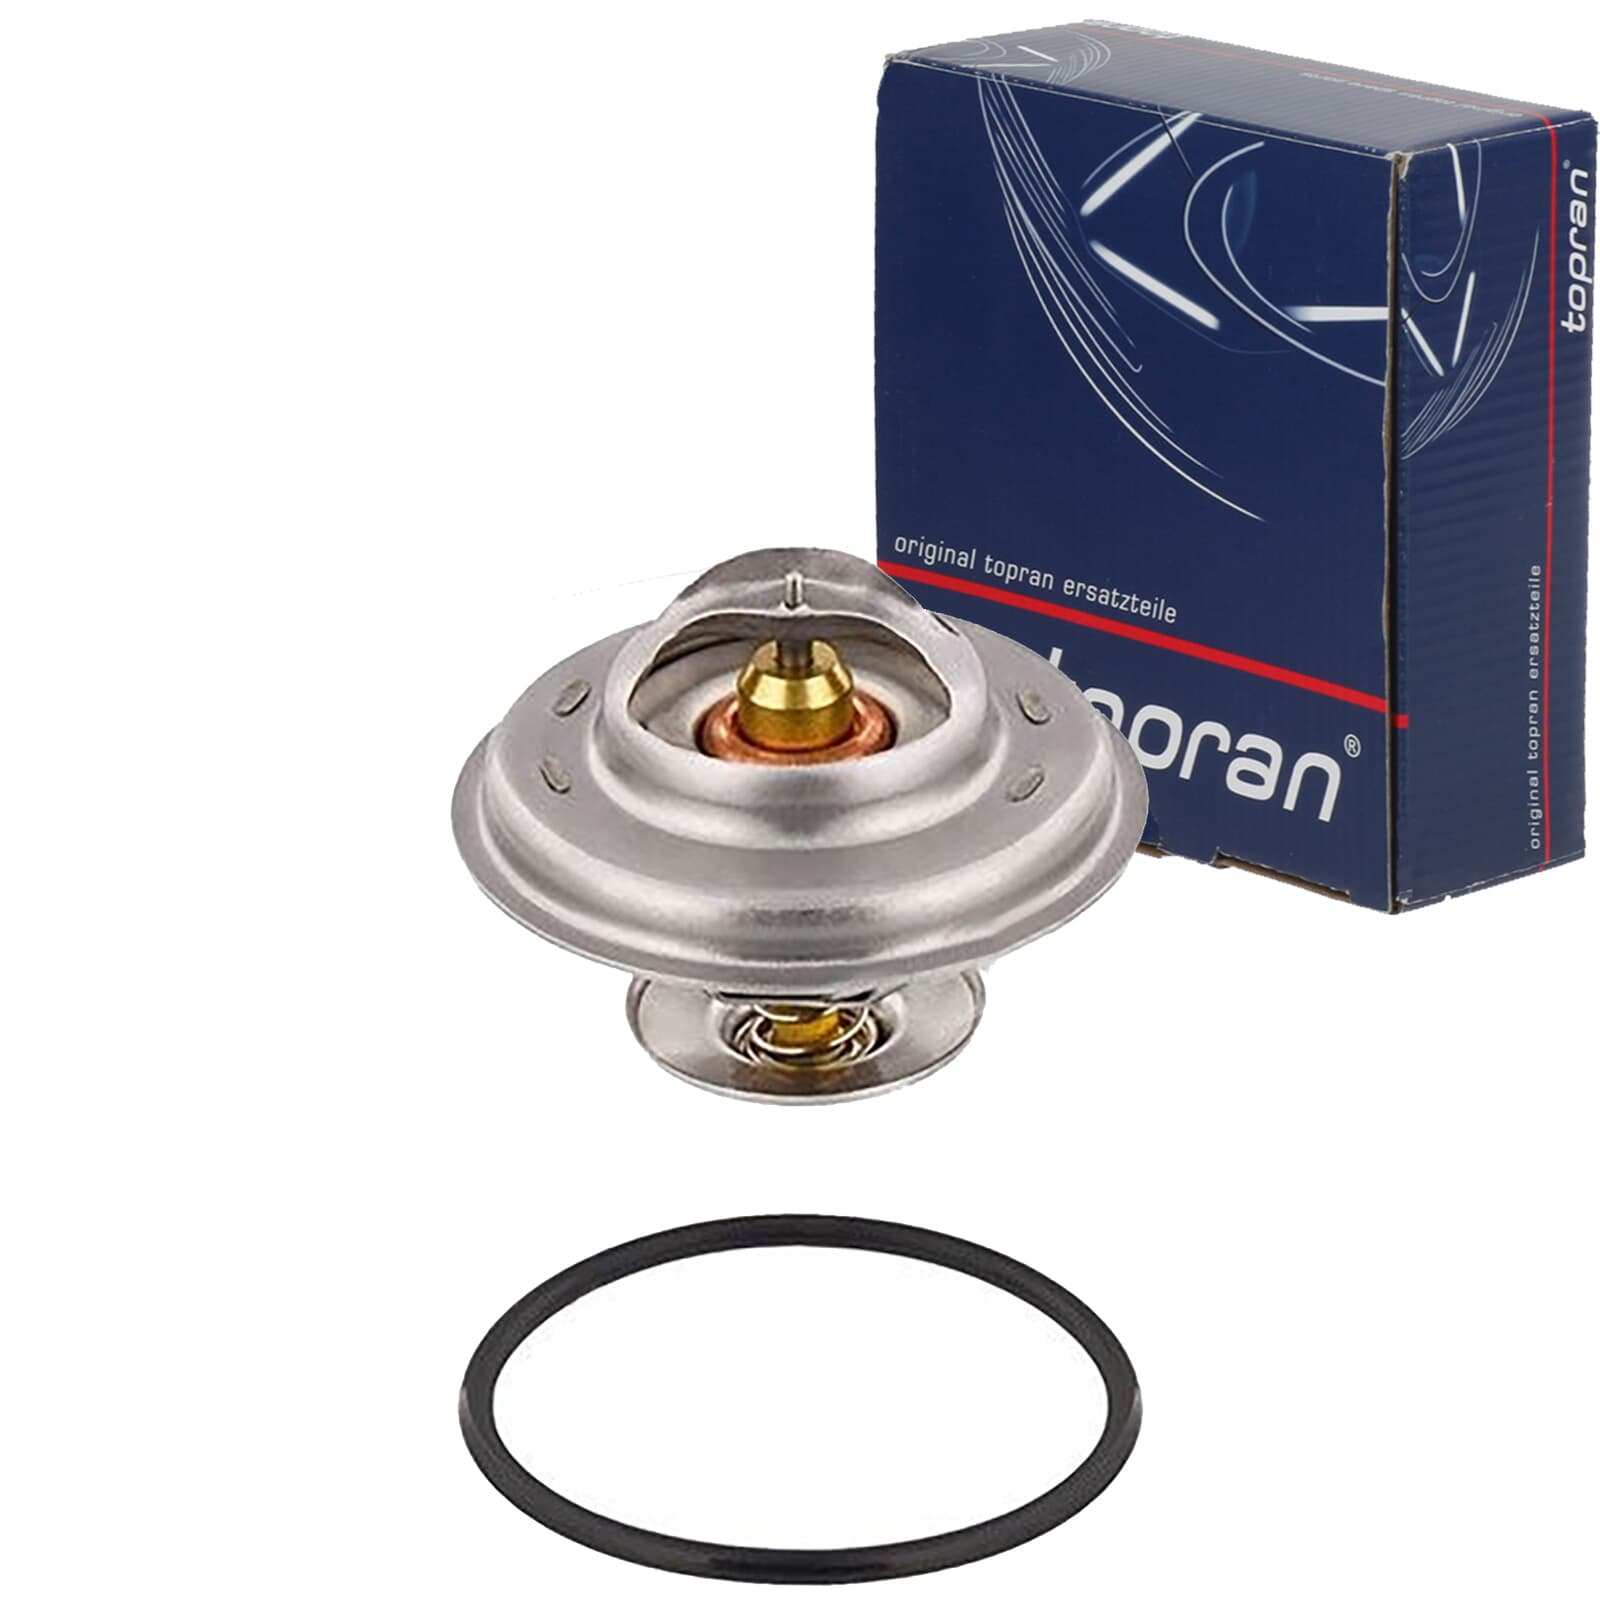 TOPRAN THERMOSTAT 87°C WITH SEAL fits Audi 100 80 90 A6 Volvo S80 V70